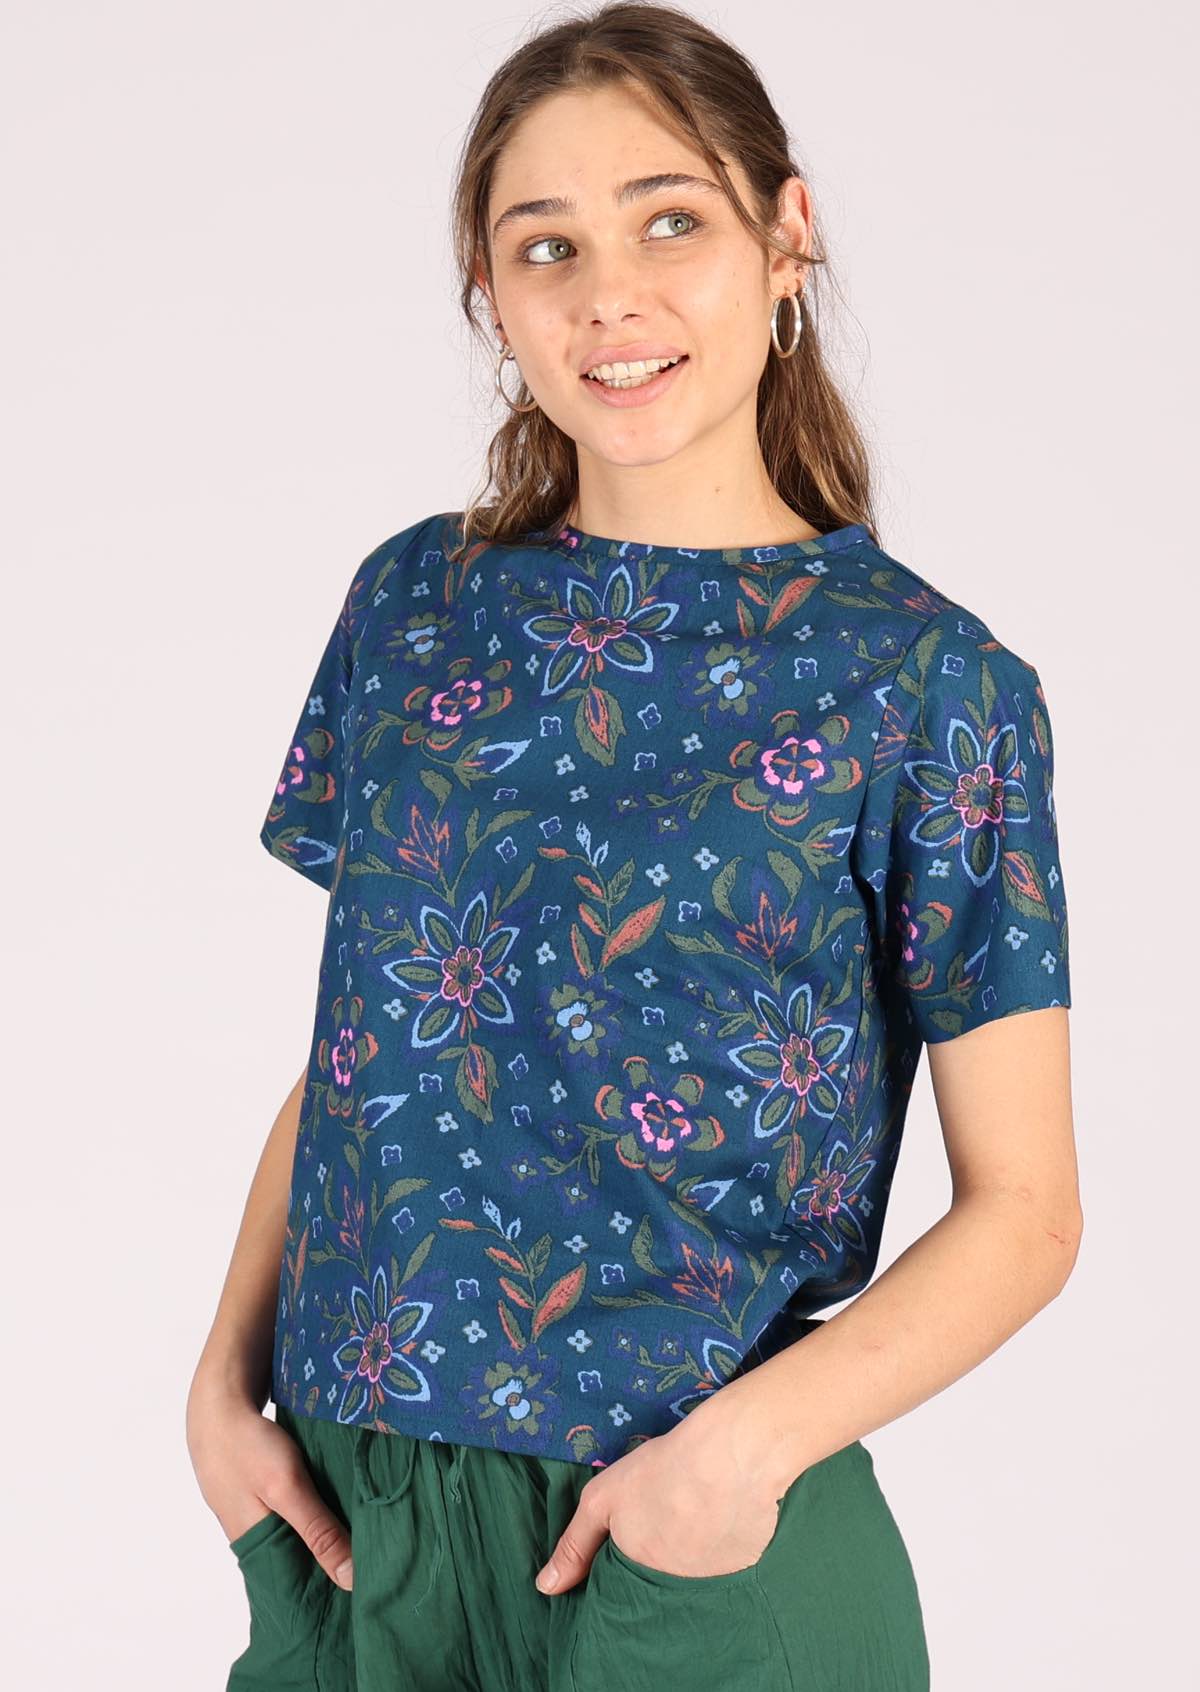 Model wears 100% cotton top with a floral pattern. 